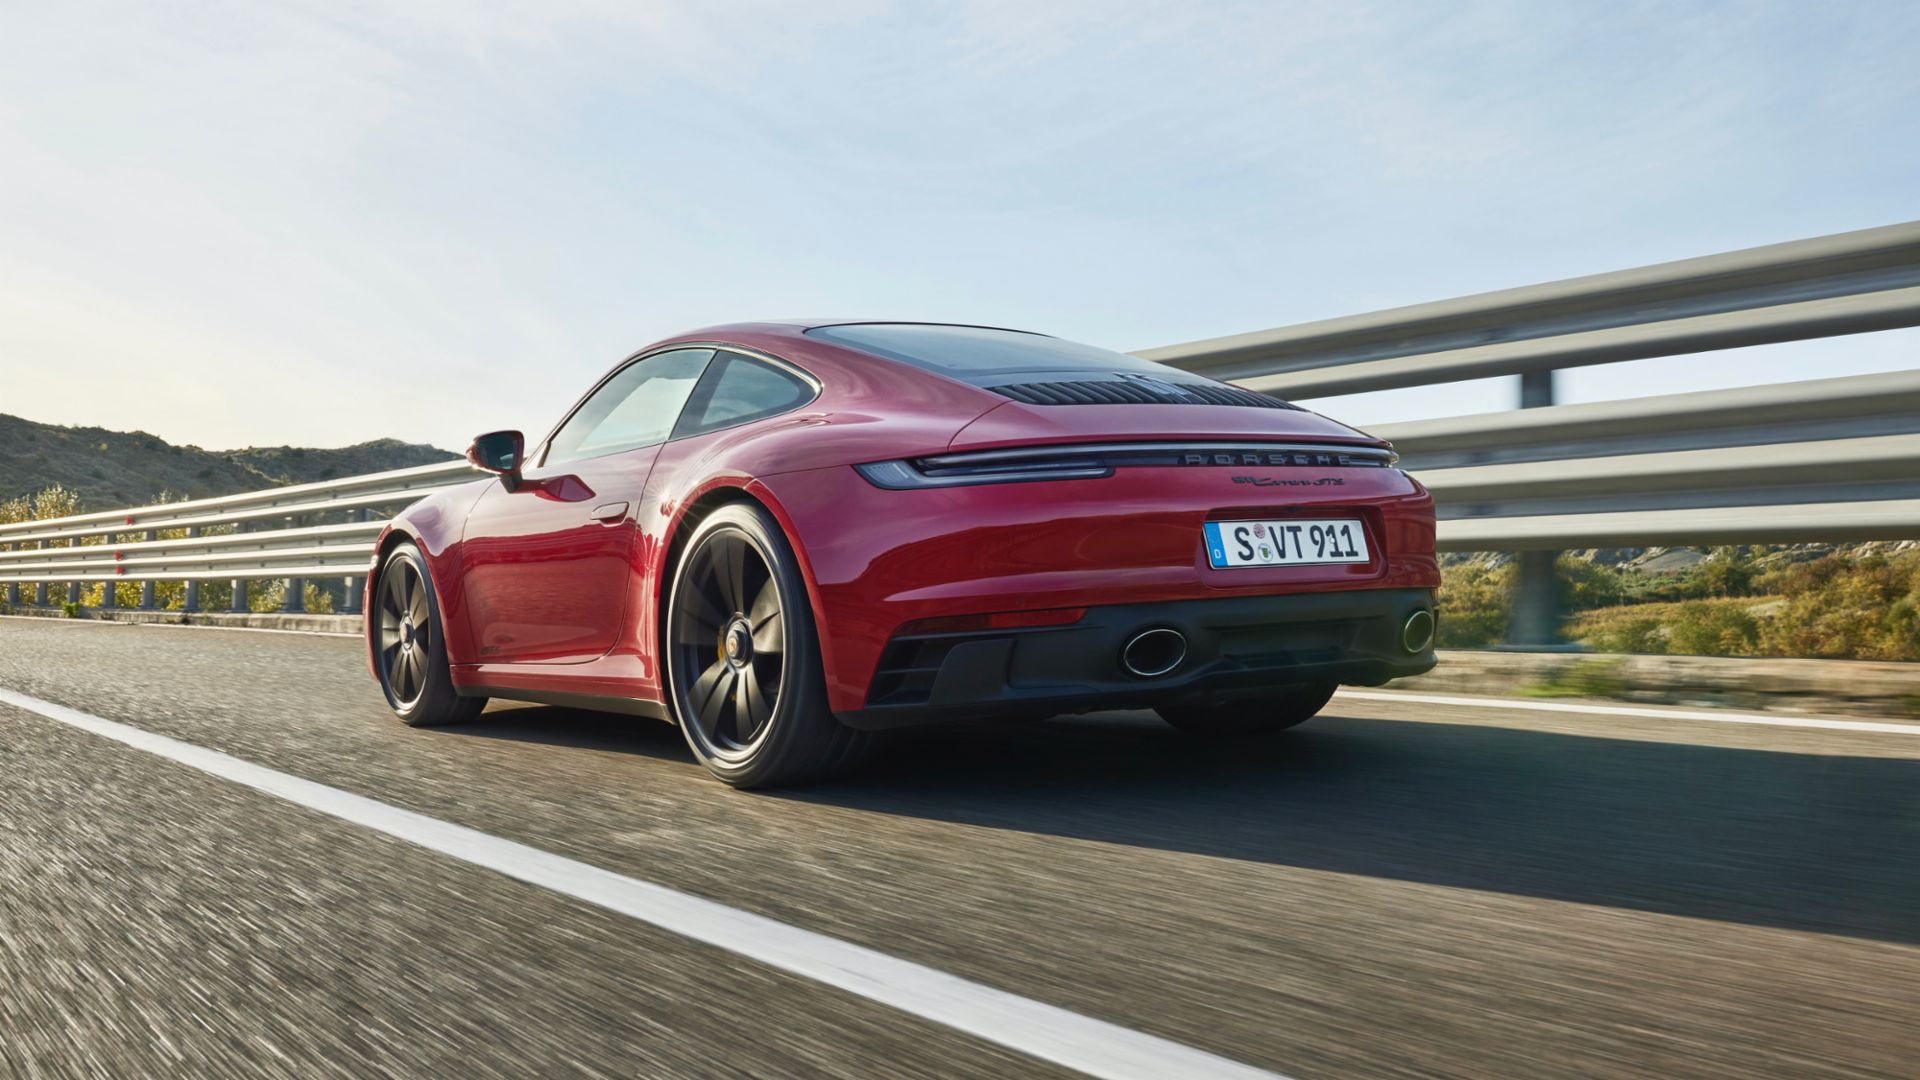 2022 Porsche 911 Carrera GTS Coupe Review: The Sweet Spot's Sweet